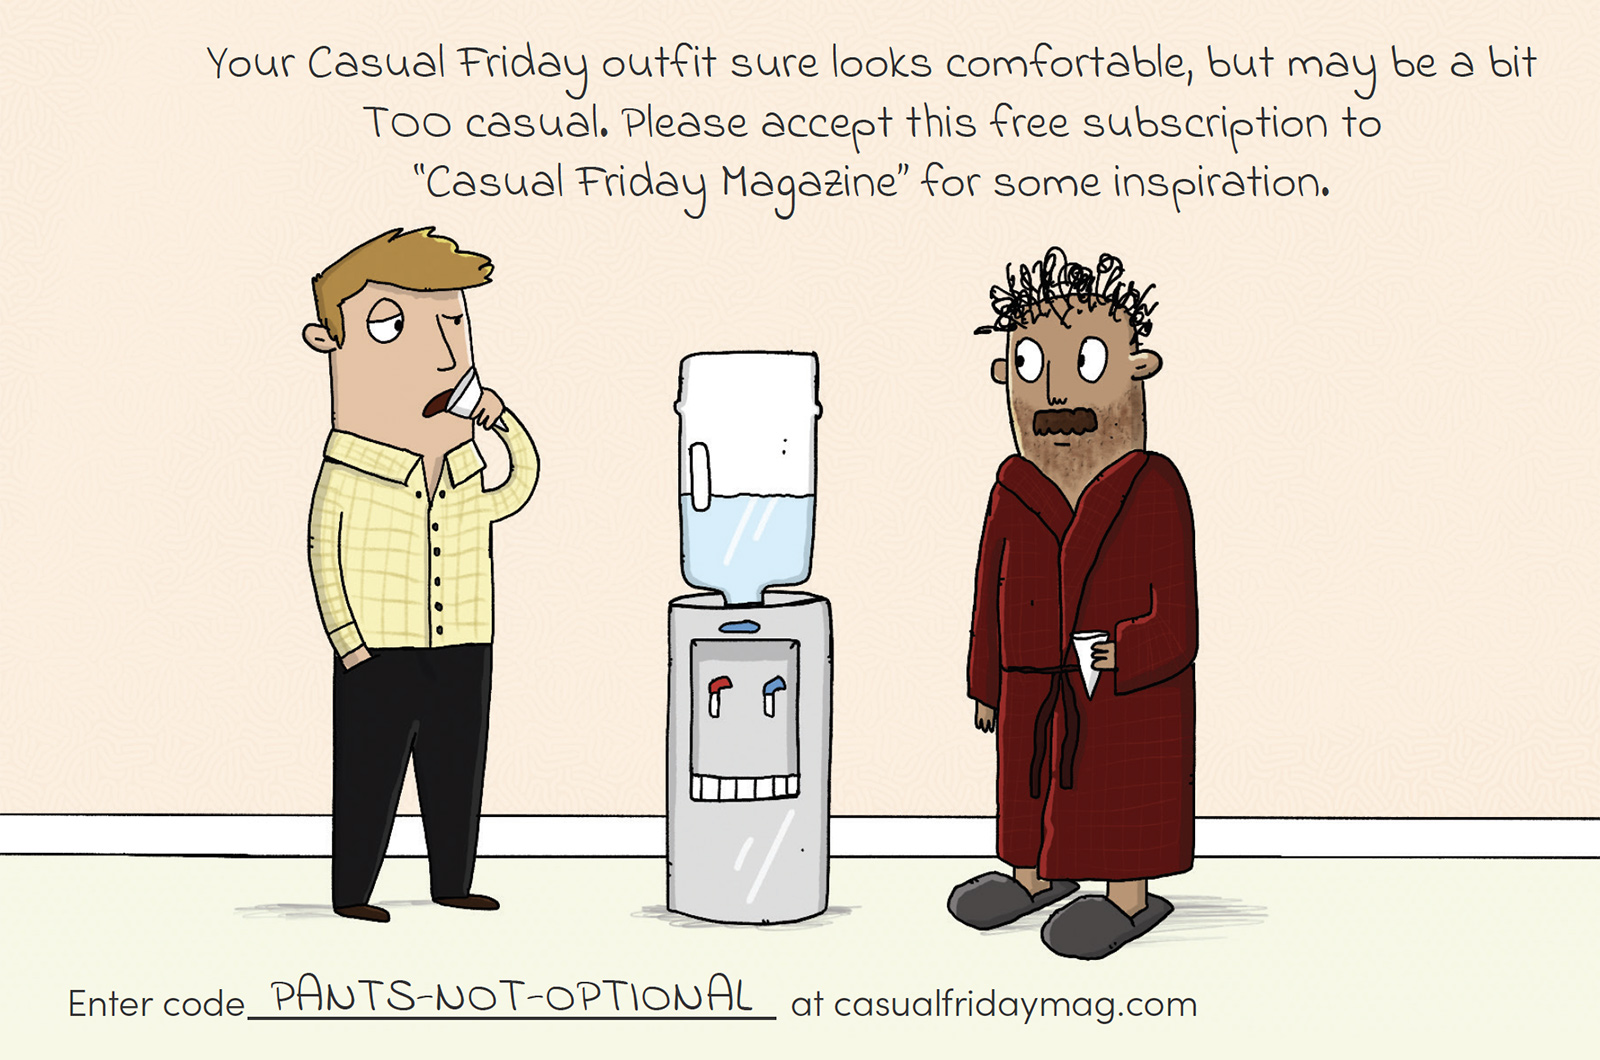 Man in bathrobe by water cooler, being told his casual friday outfit is too casual.